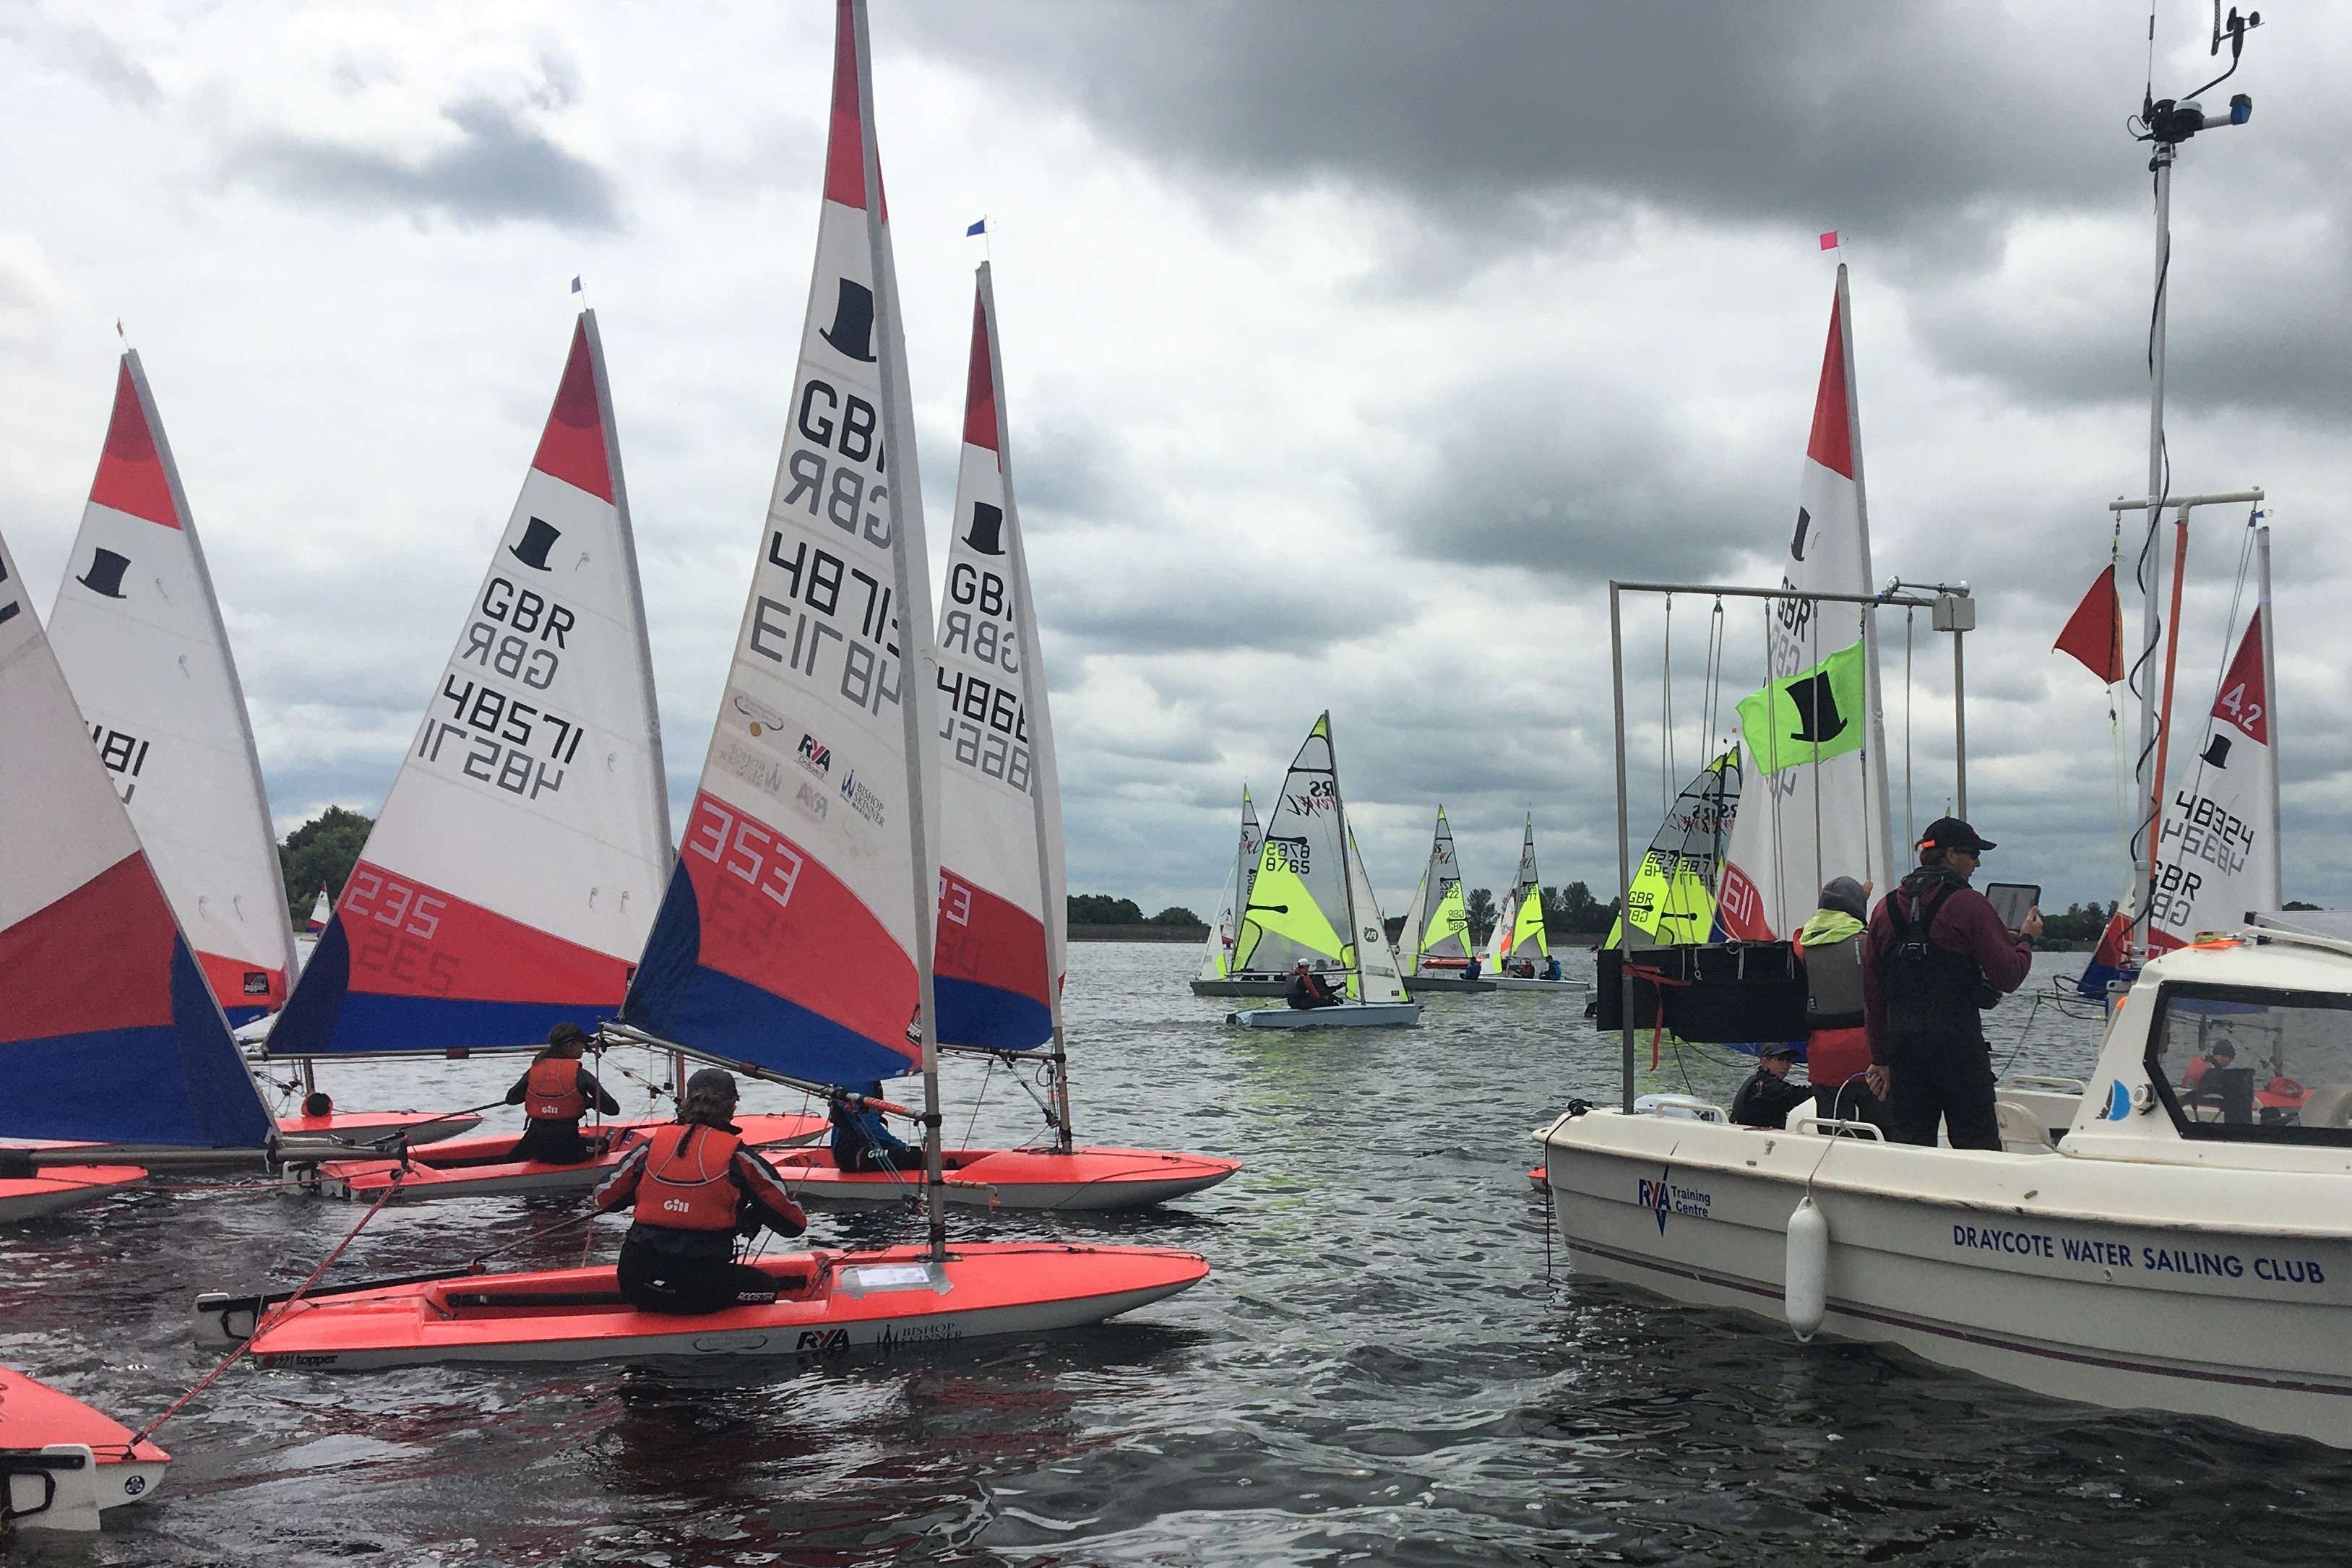 Toppers lining up for a start with Fevas in the background at the committee boat end of the line, British Youth Sailing Regional Junior Championships 2022, Draycote Water SC.